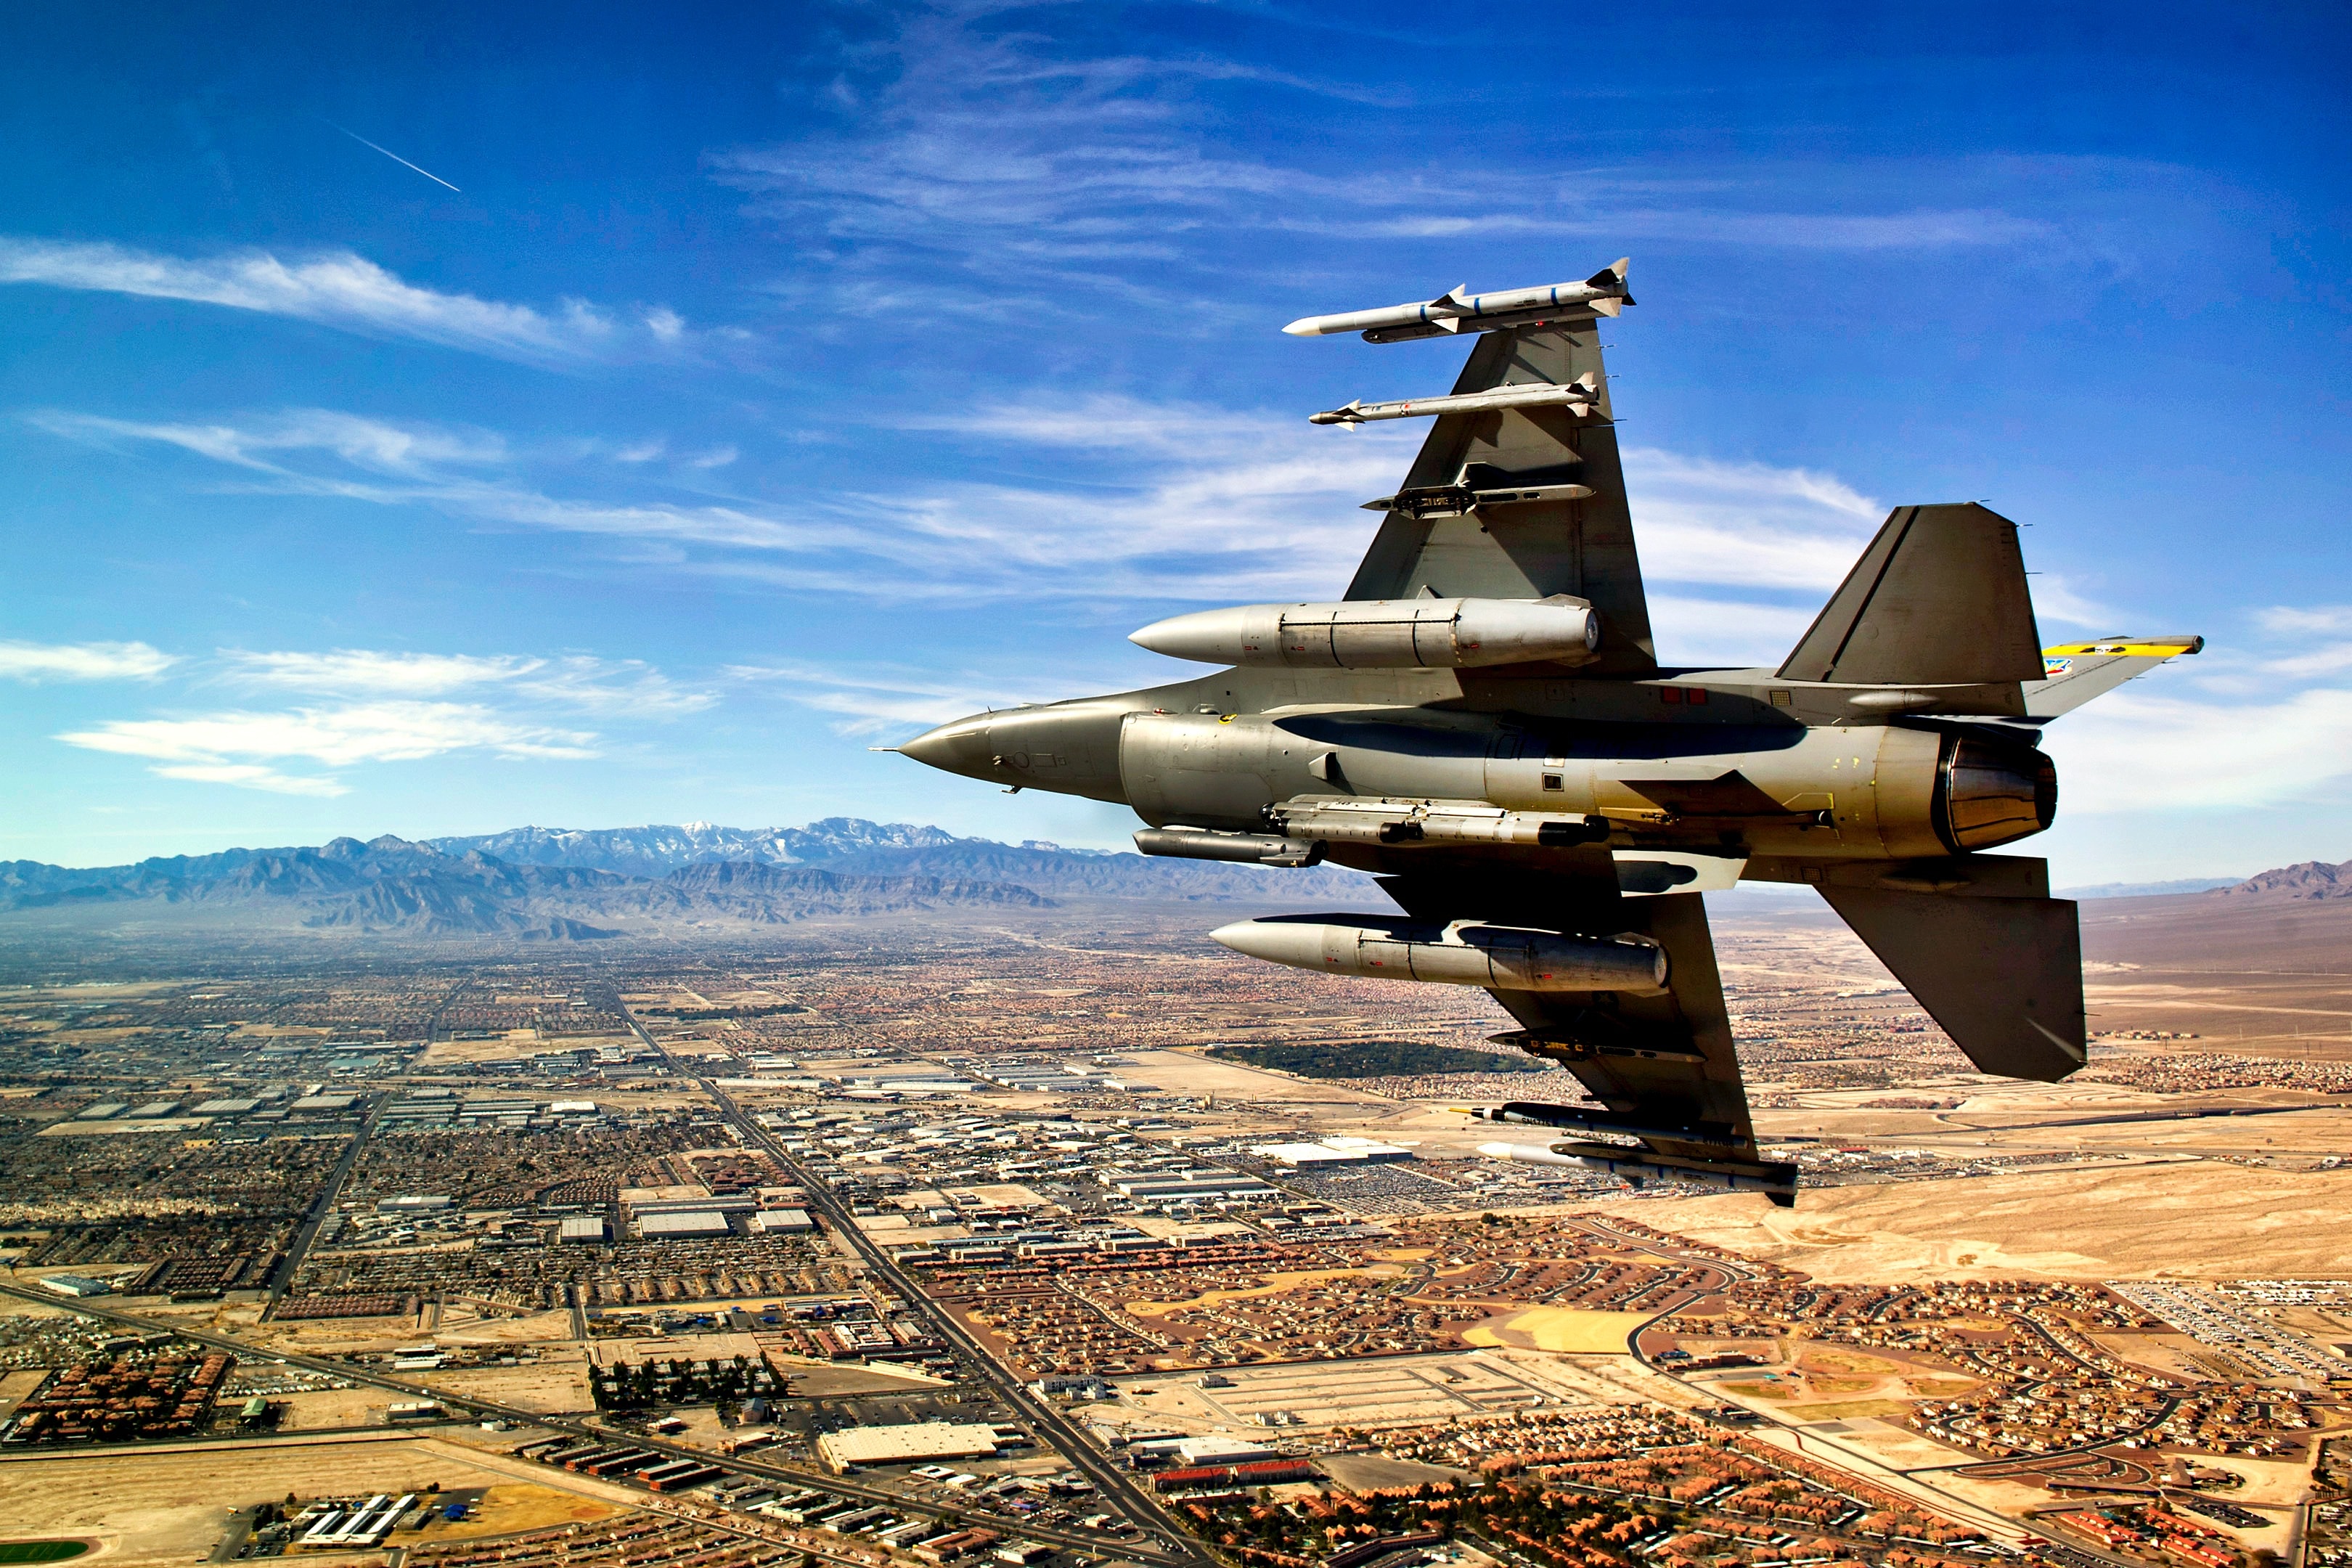 Jet, Fighter, Clouds, Sky, Las Vegas, military, air vehicle